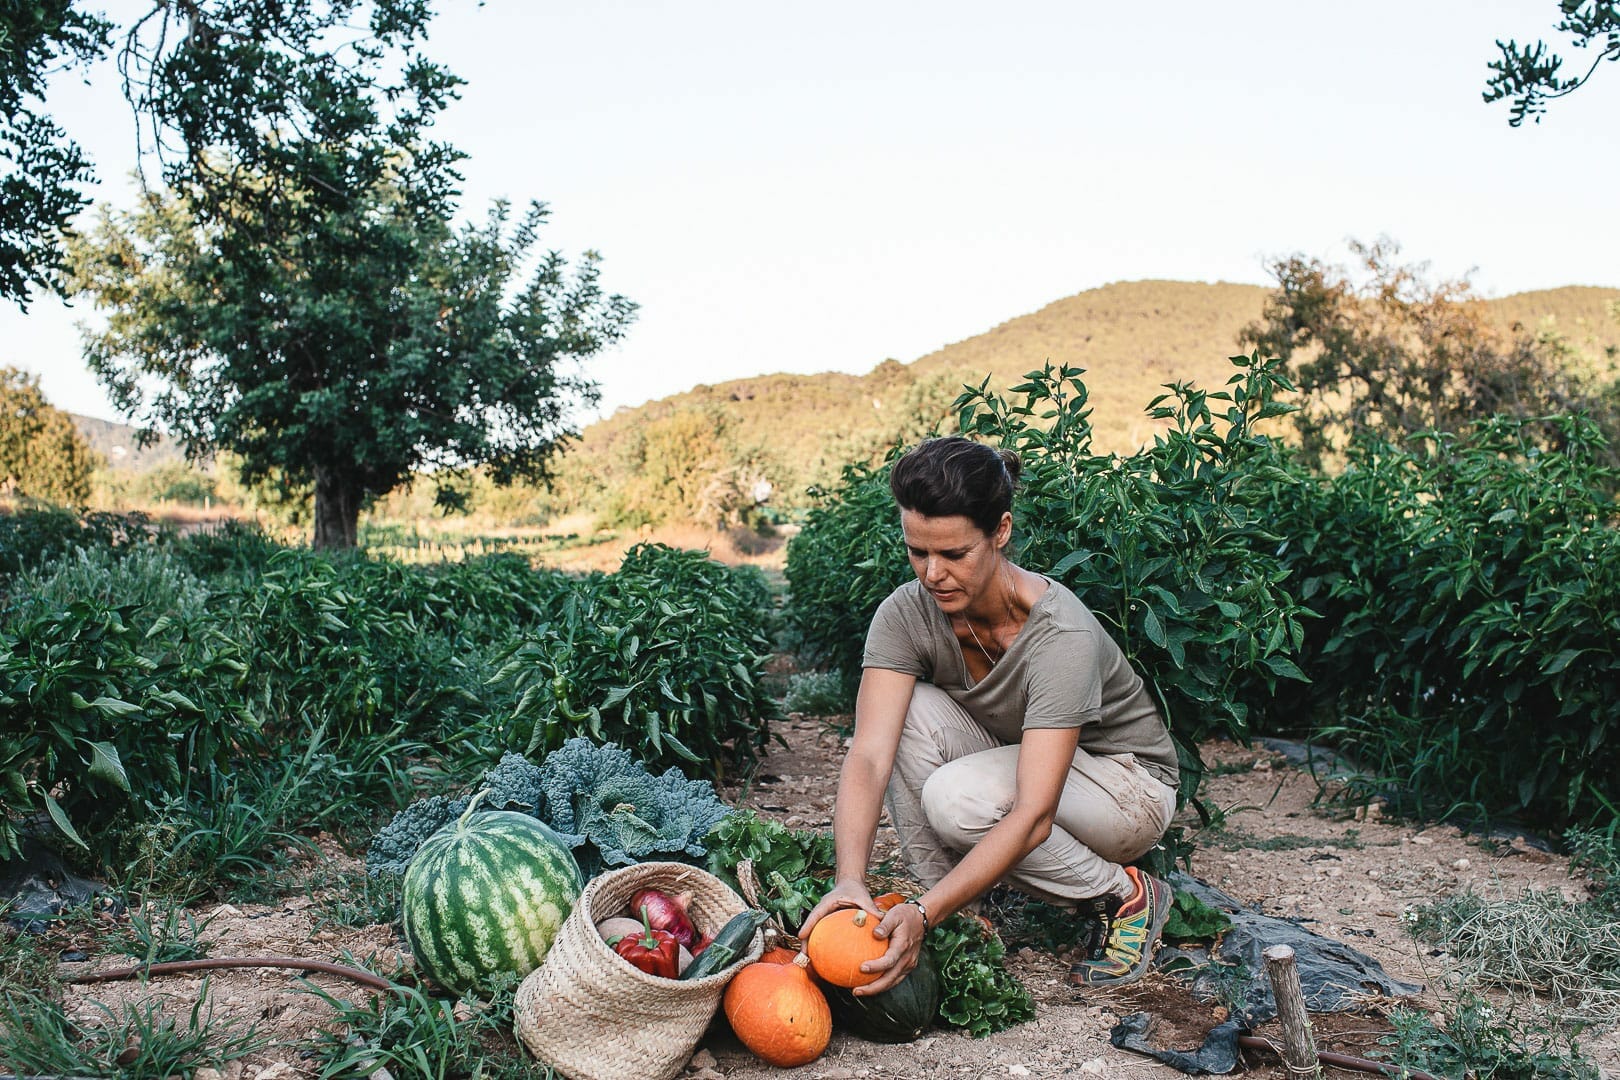 Photograph of Marina collecting vegetables from her Can Puvil garden in Ibiza